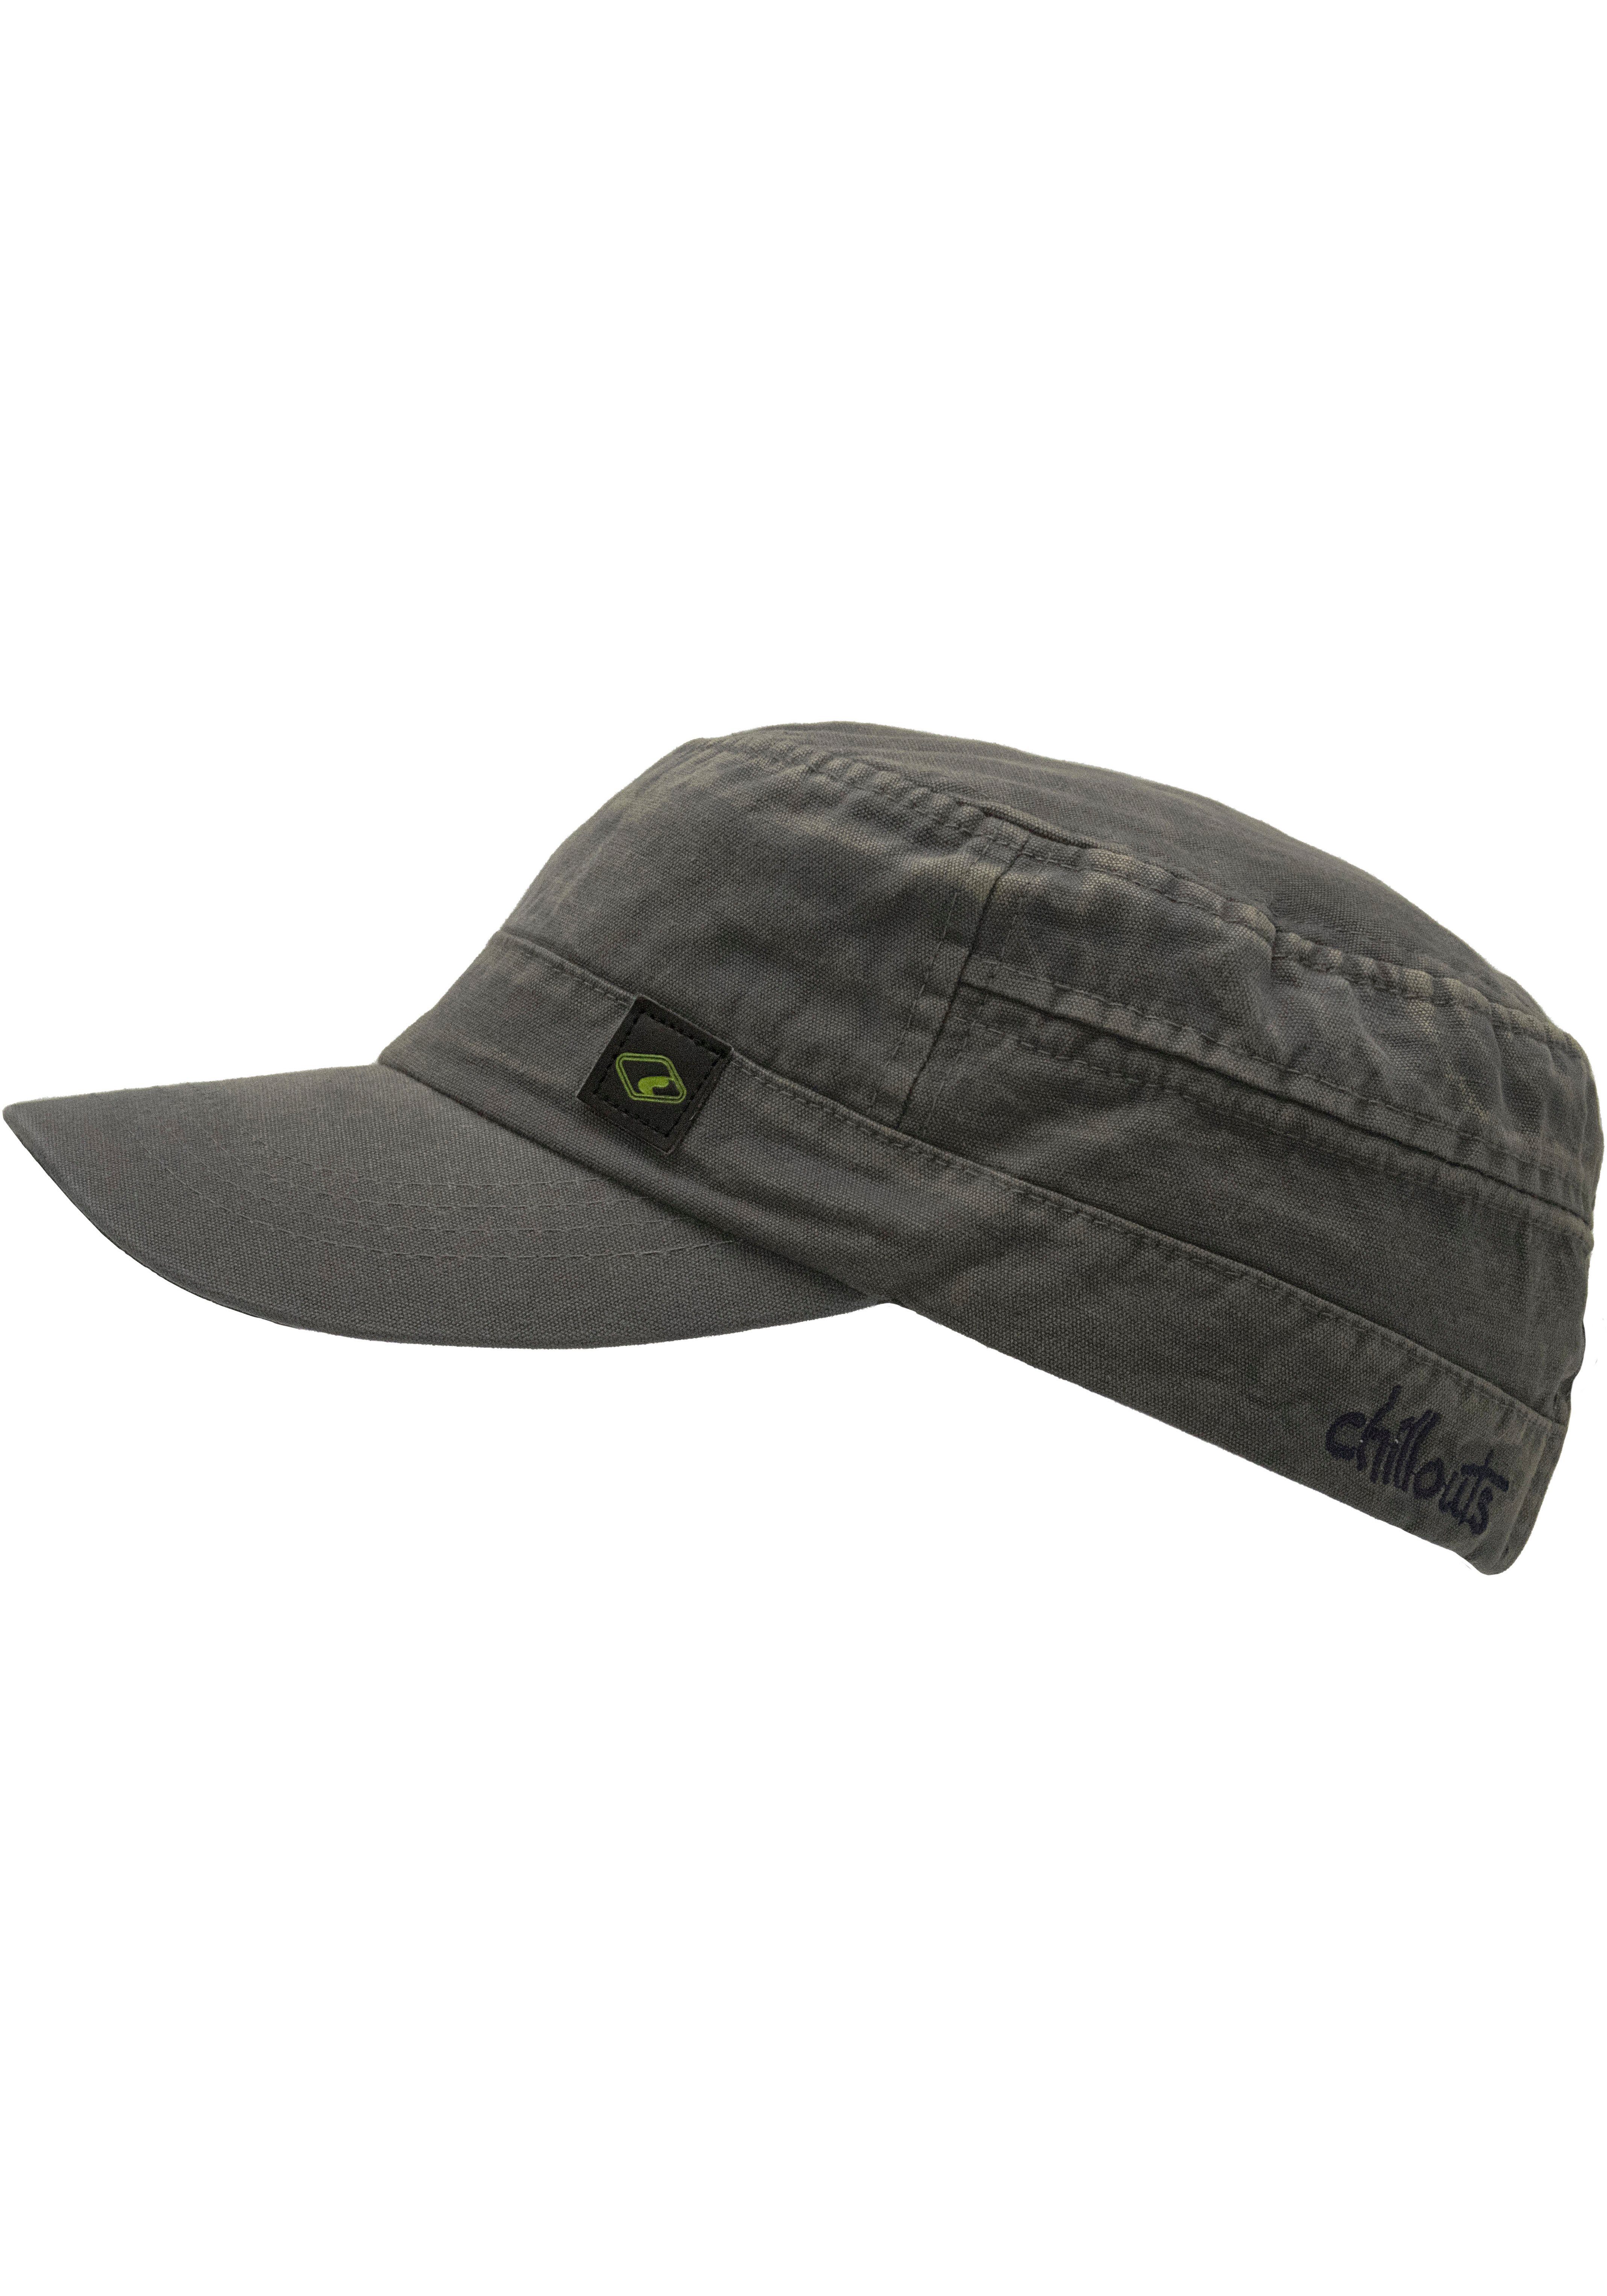 chillouts Army Cap El Hat grey aus reiner Baumwolle, Size washed atmungsaktiv, Paso One